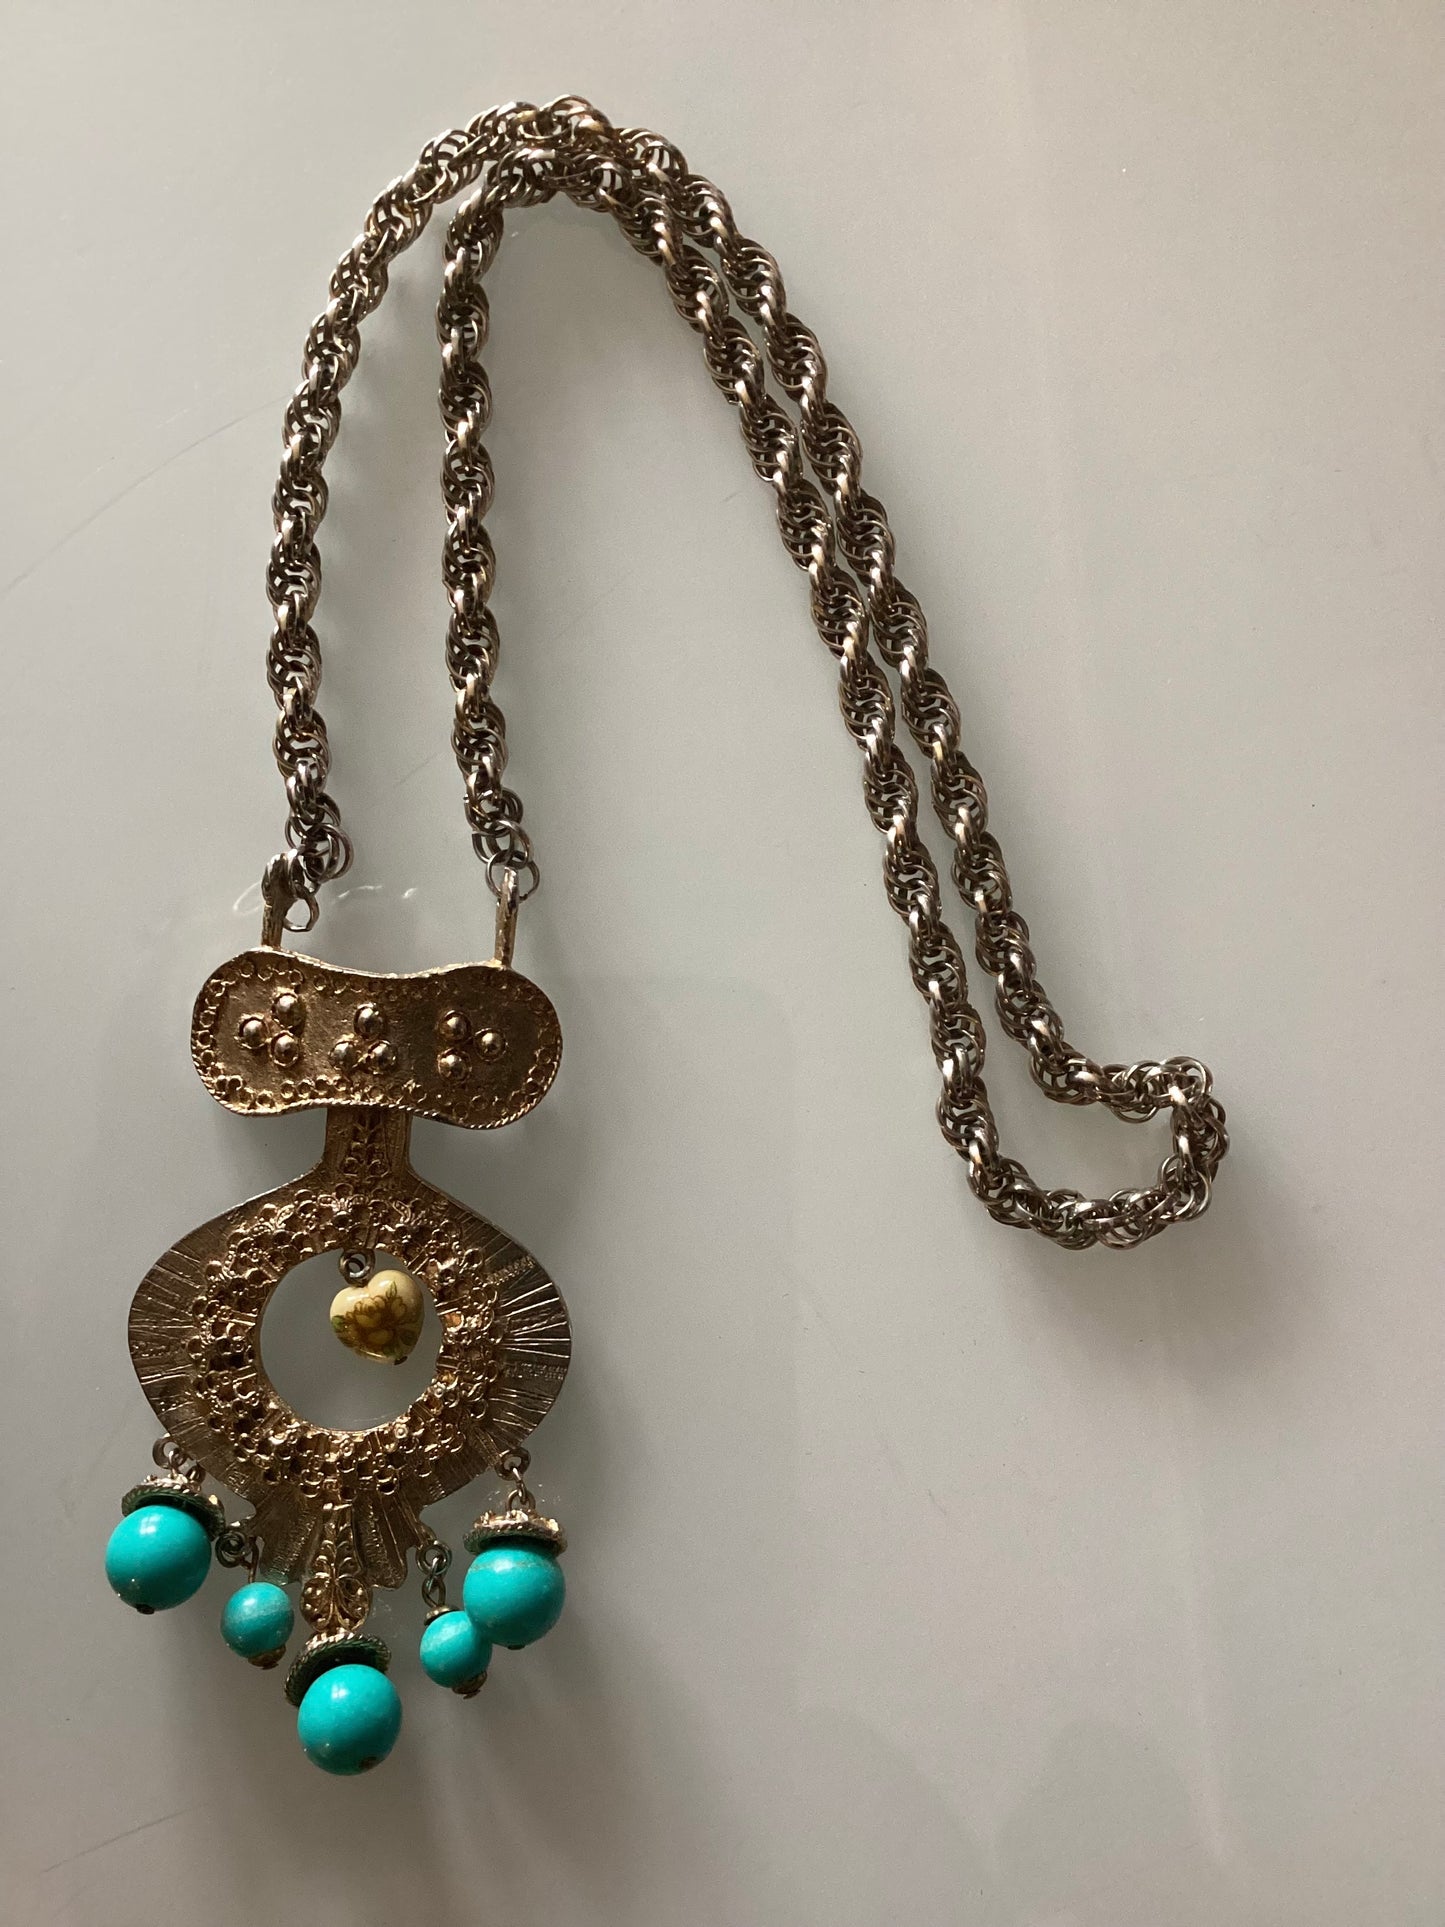 Pendant necklace with turquoise dangle and a small heart with flowers in the center